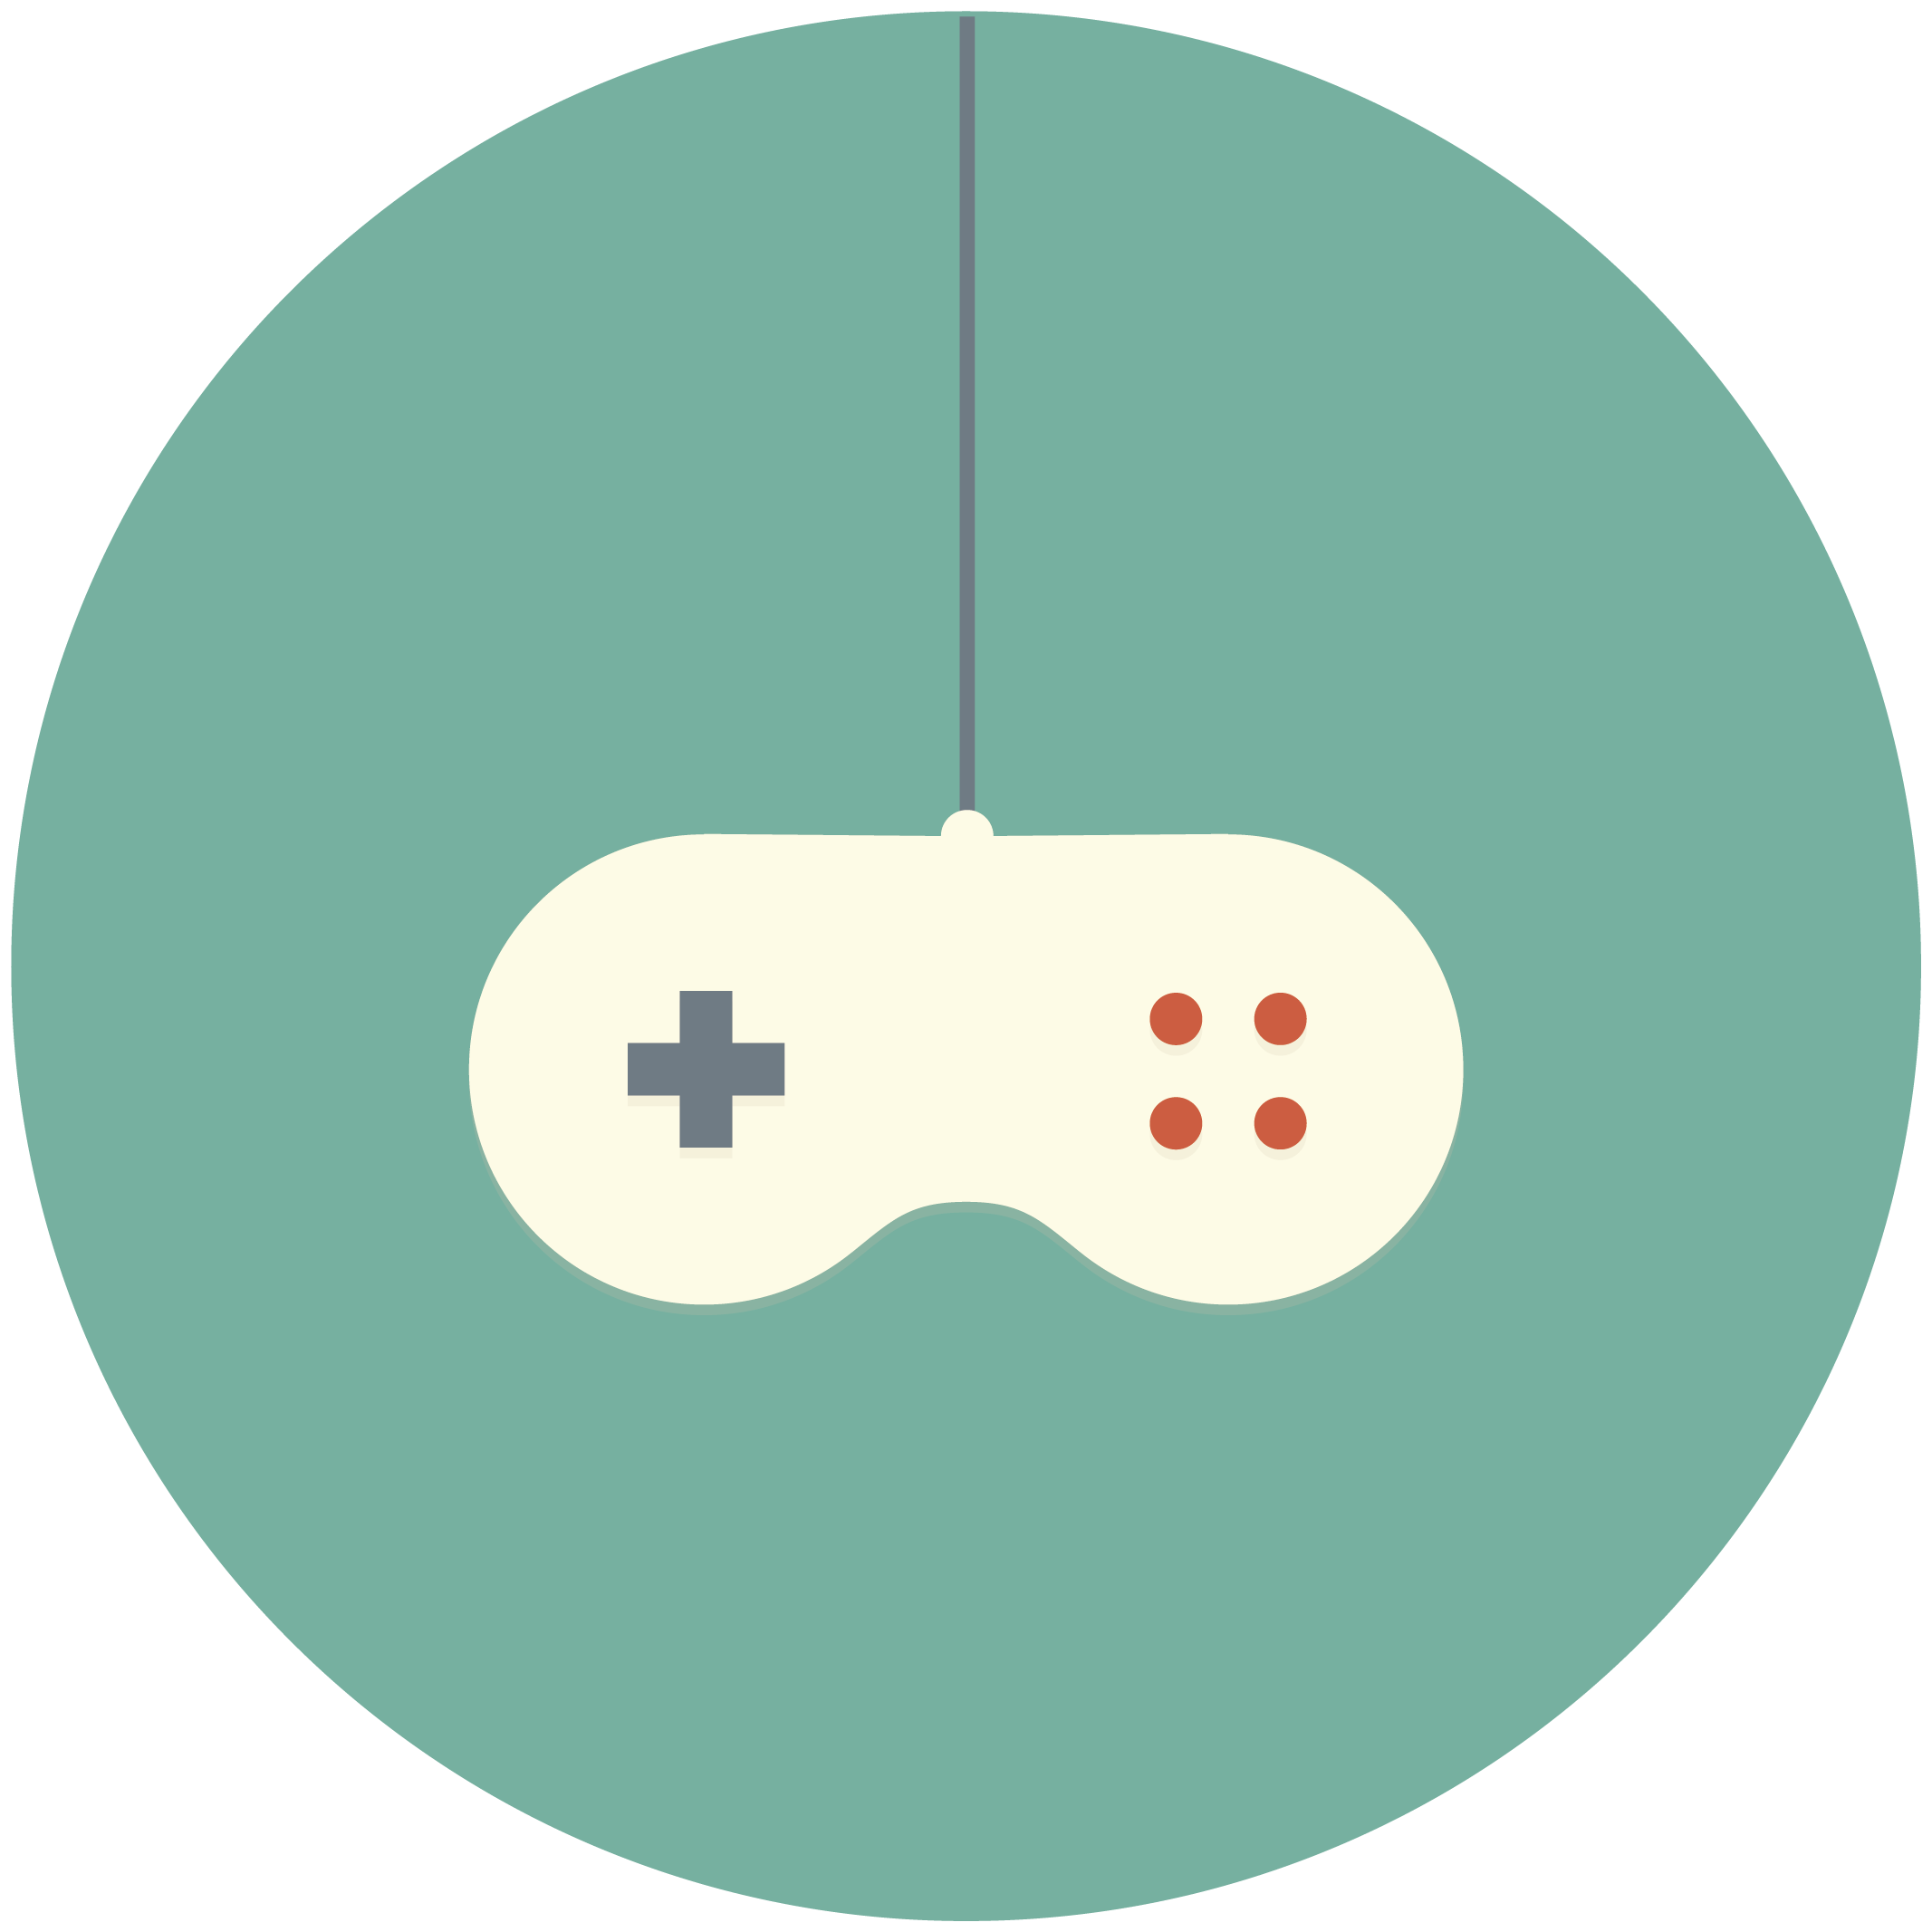 games, control game play player icon #21592